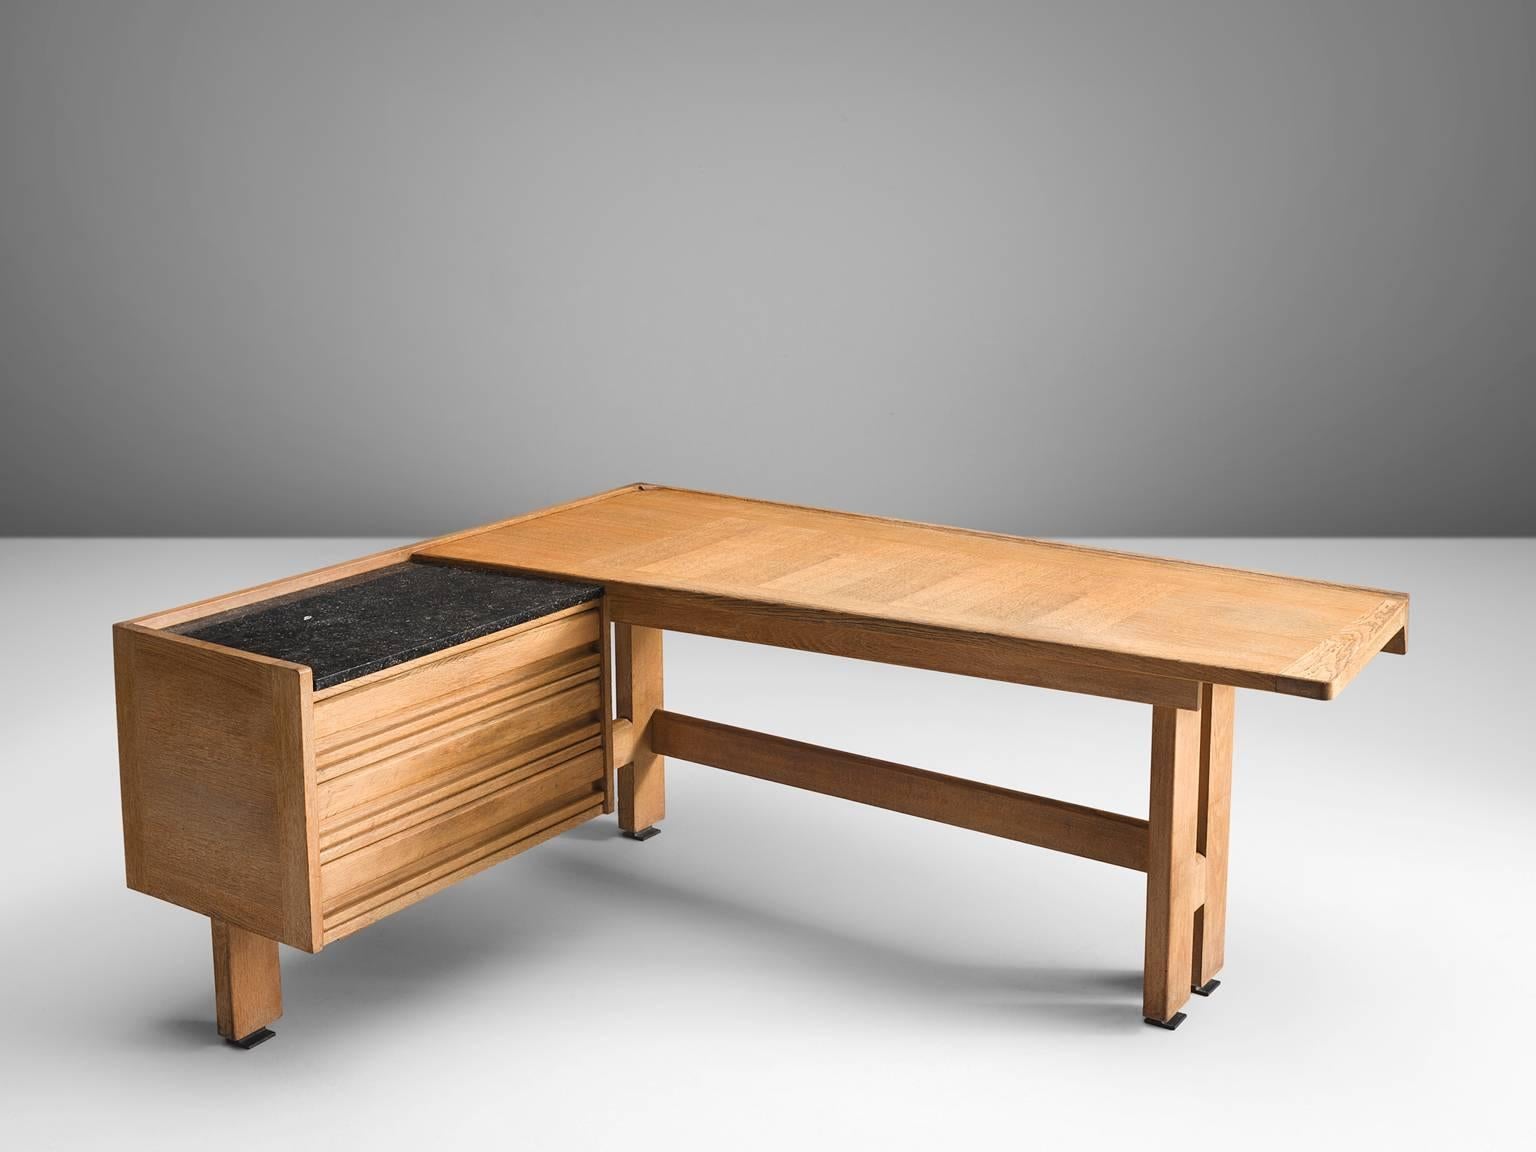 Guillerme et Chambron, desk, oak and granite, by France, 1960s. 

Corner desk by French designer duo Guillerme and Chambron. This executive desk holds the characteristic decorations and lines of this designer duo. The top is inlaid with wood in